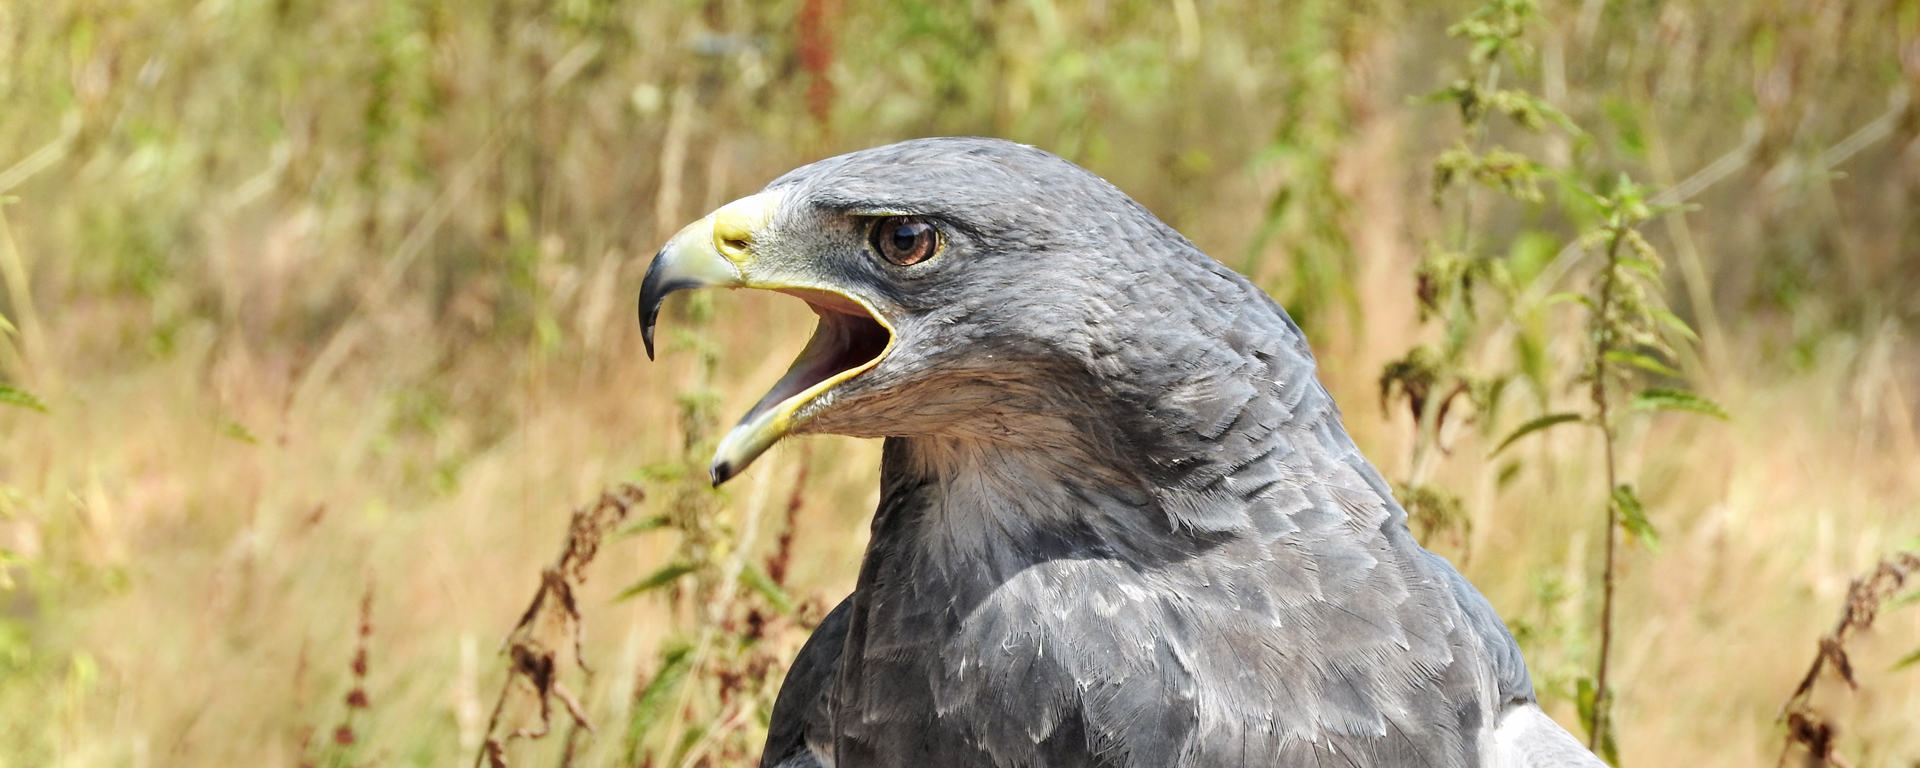 Chevron strives to avoid or reduce the potential for signiﬁcant impacts on sensitive species, habitats and ecosystems, including the South American Black-Chested Buzzard Eagles.